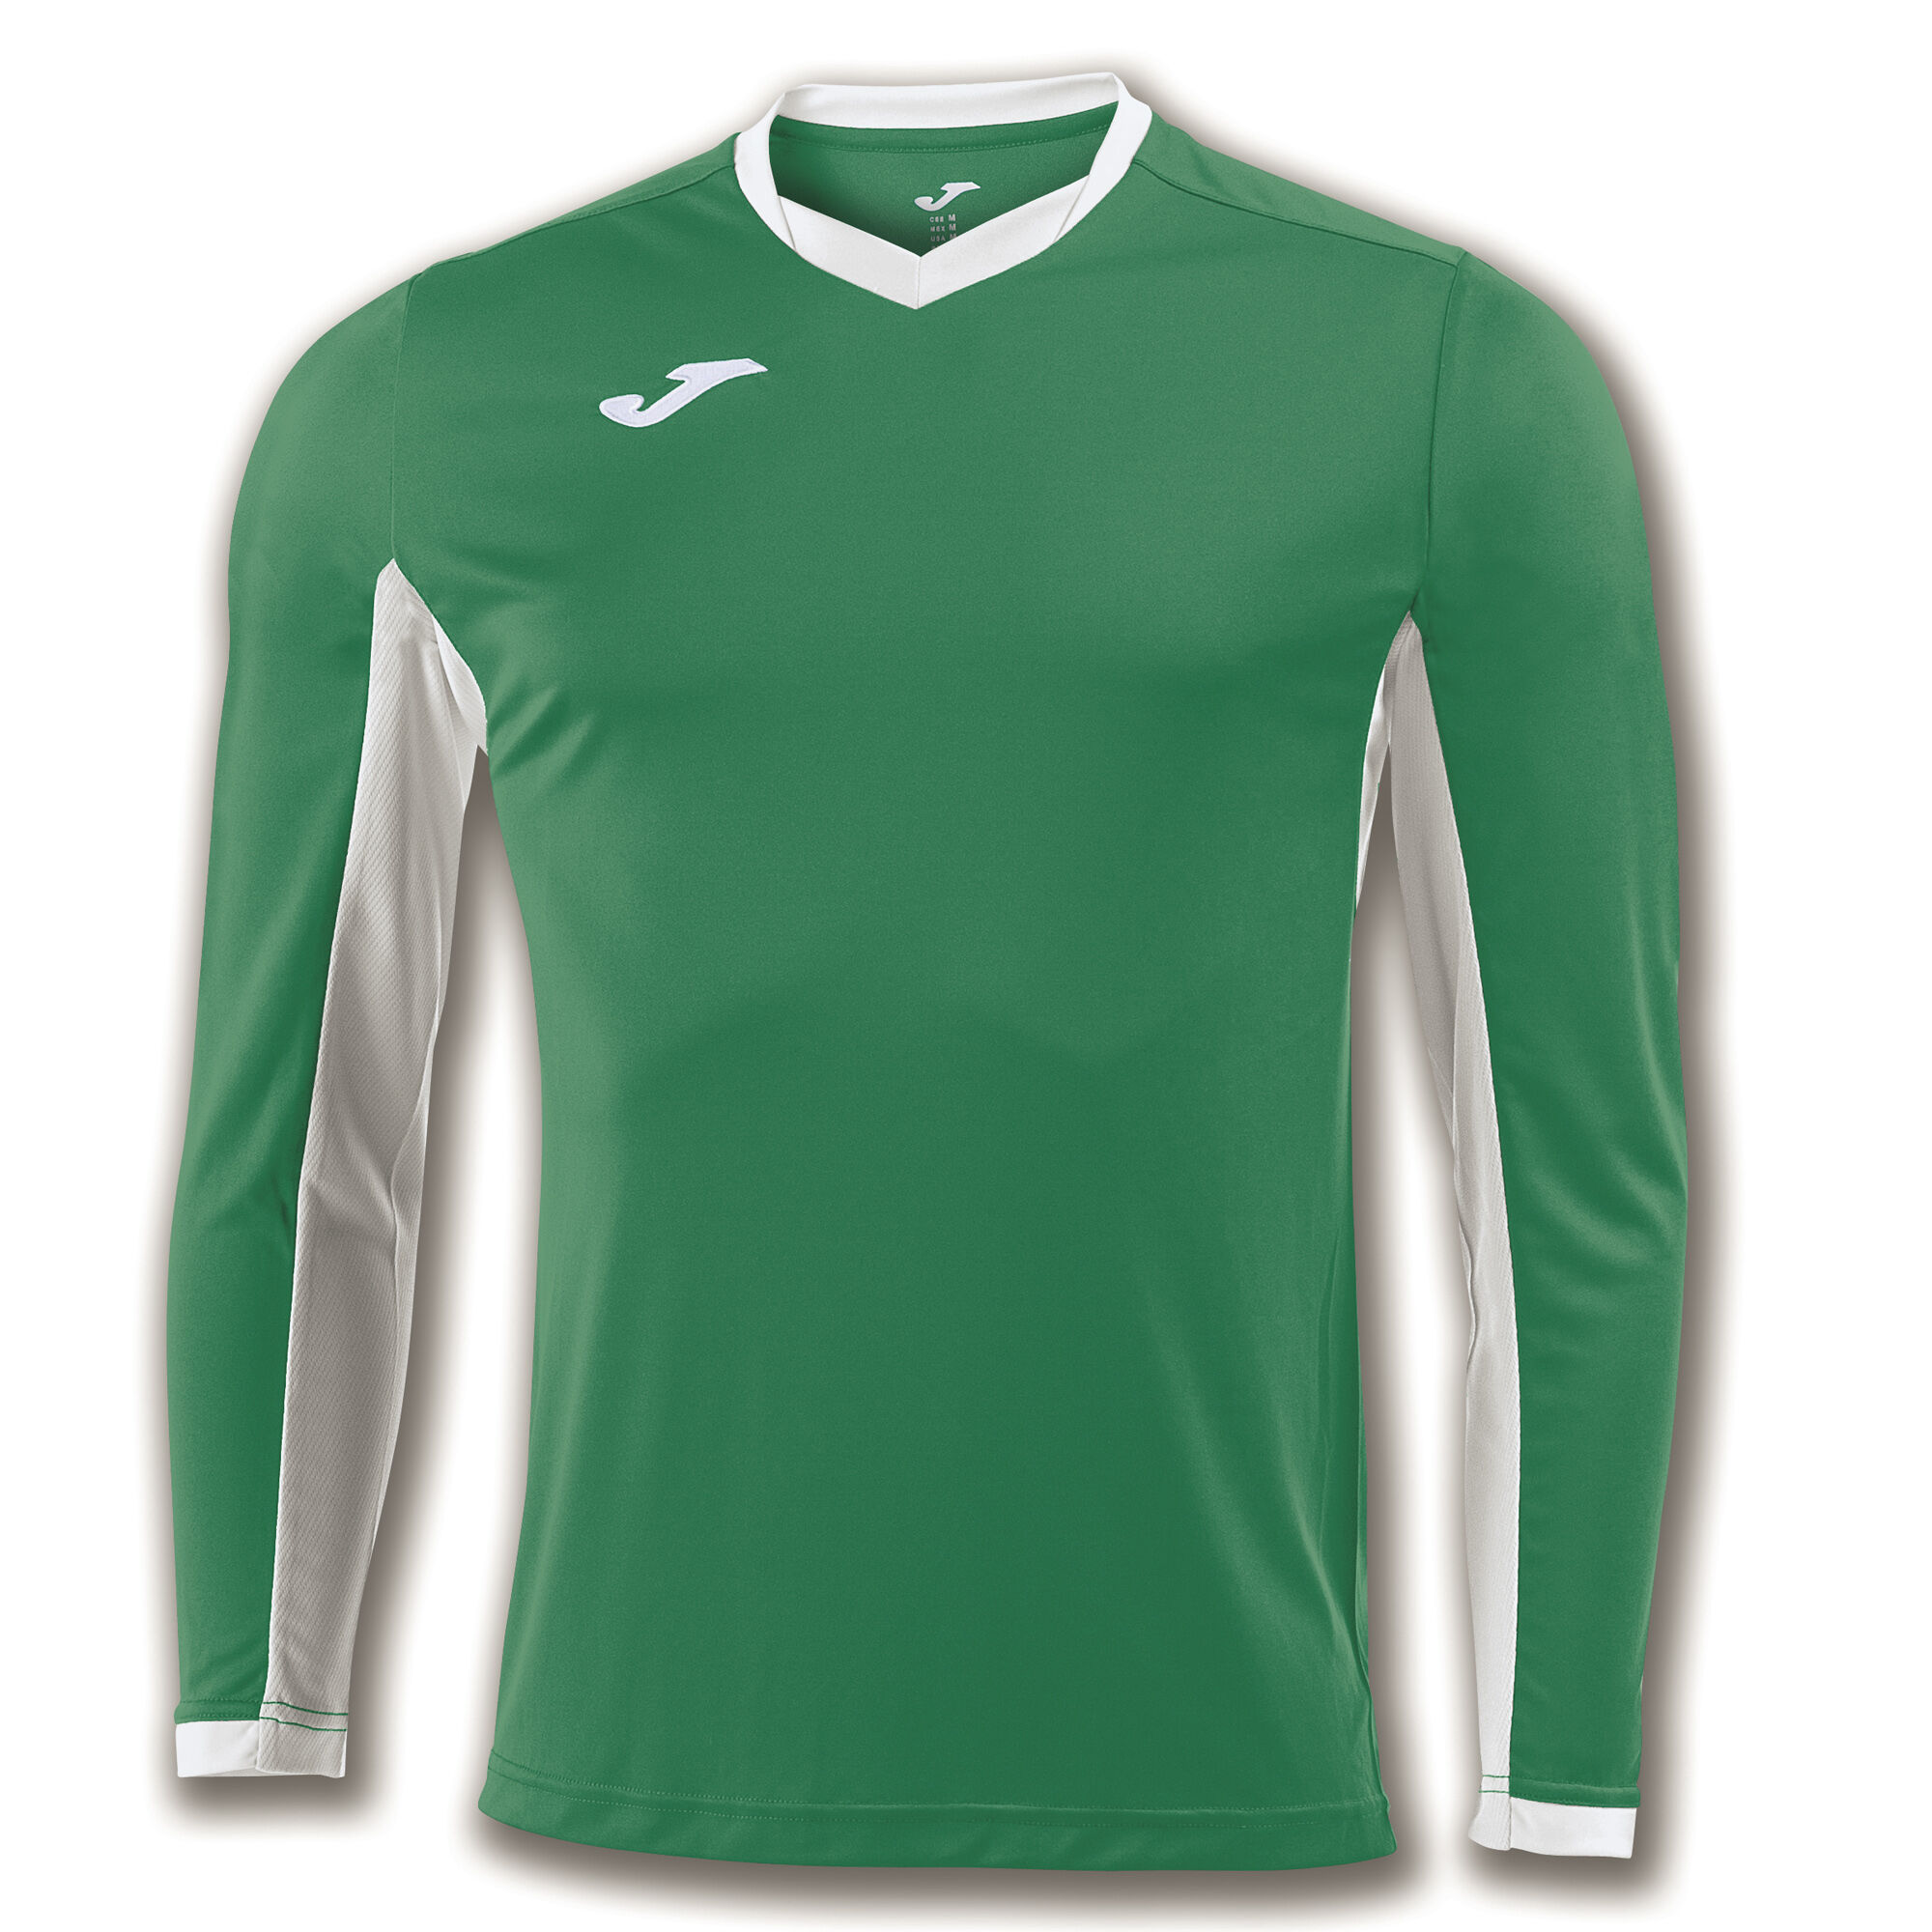 MAILLOT MANCHES LONGUES HOMME CHAMPIONSHIP IV VERT BLANC